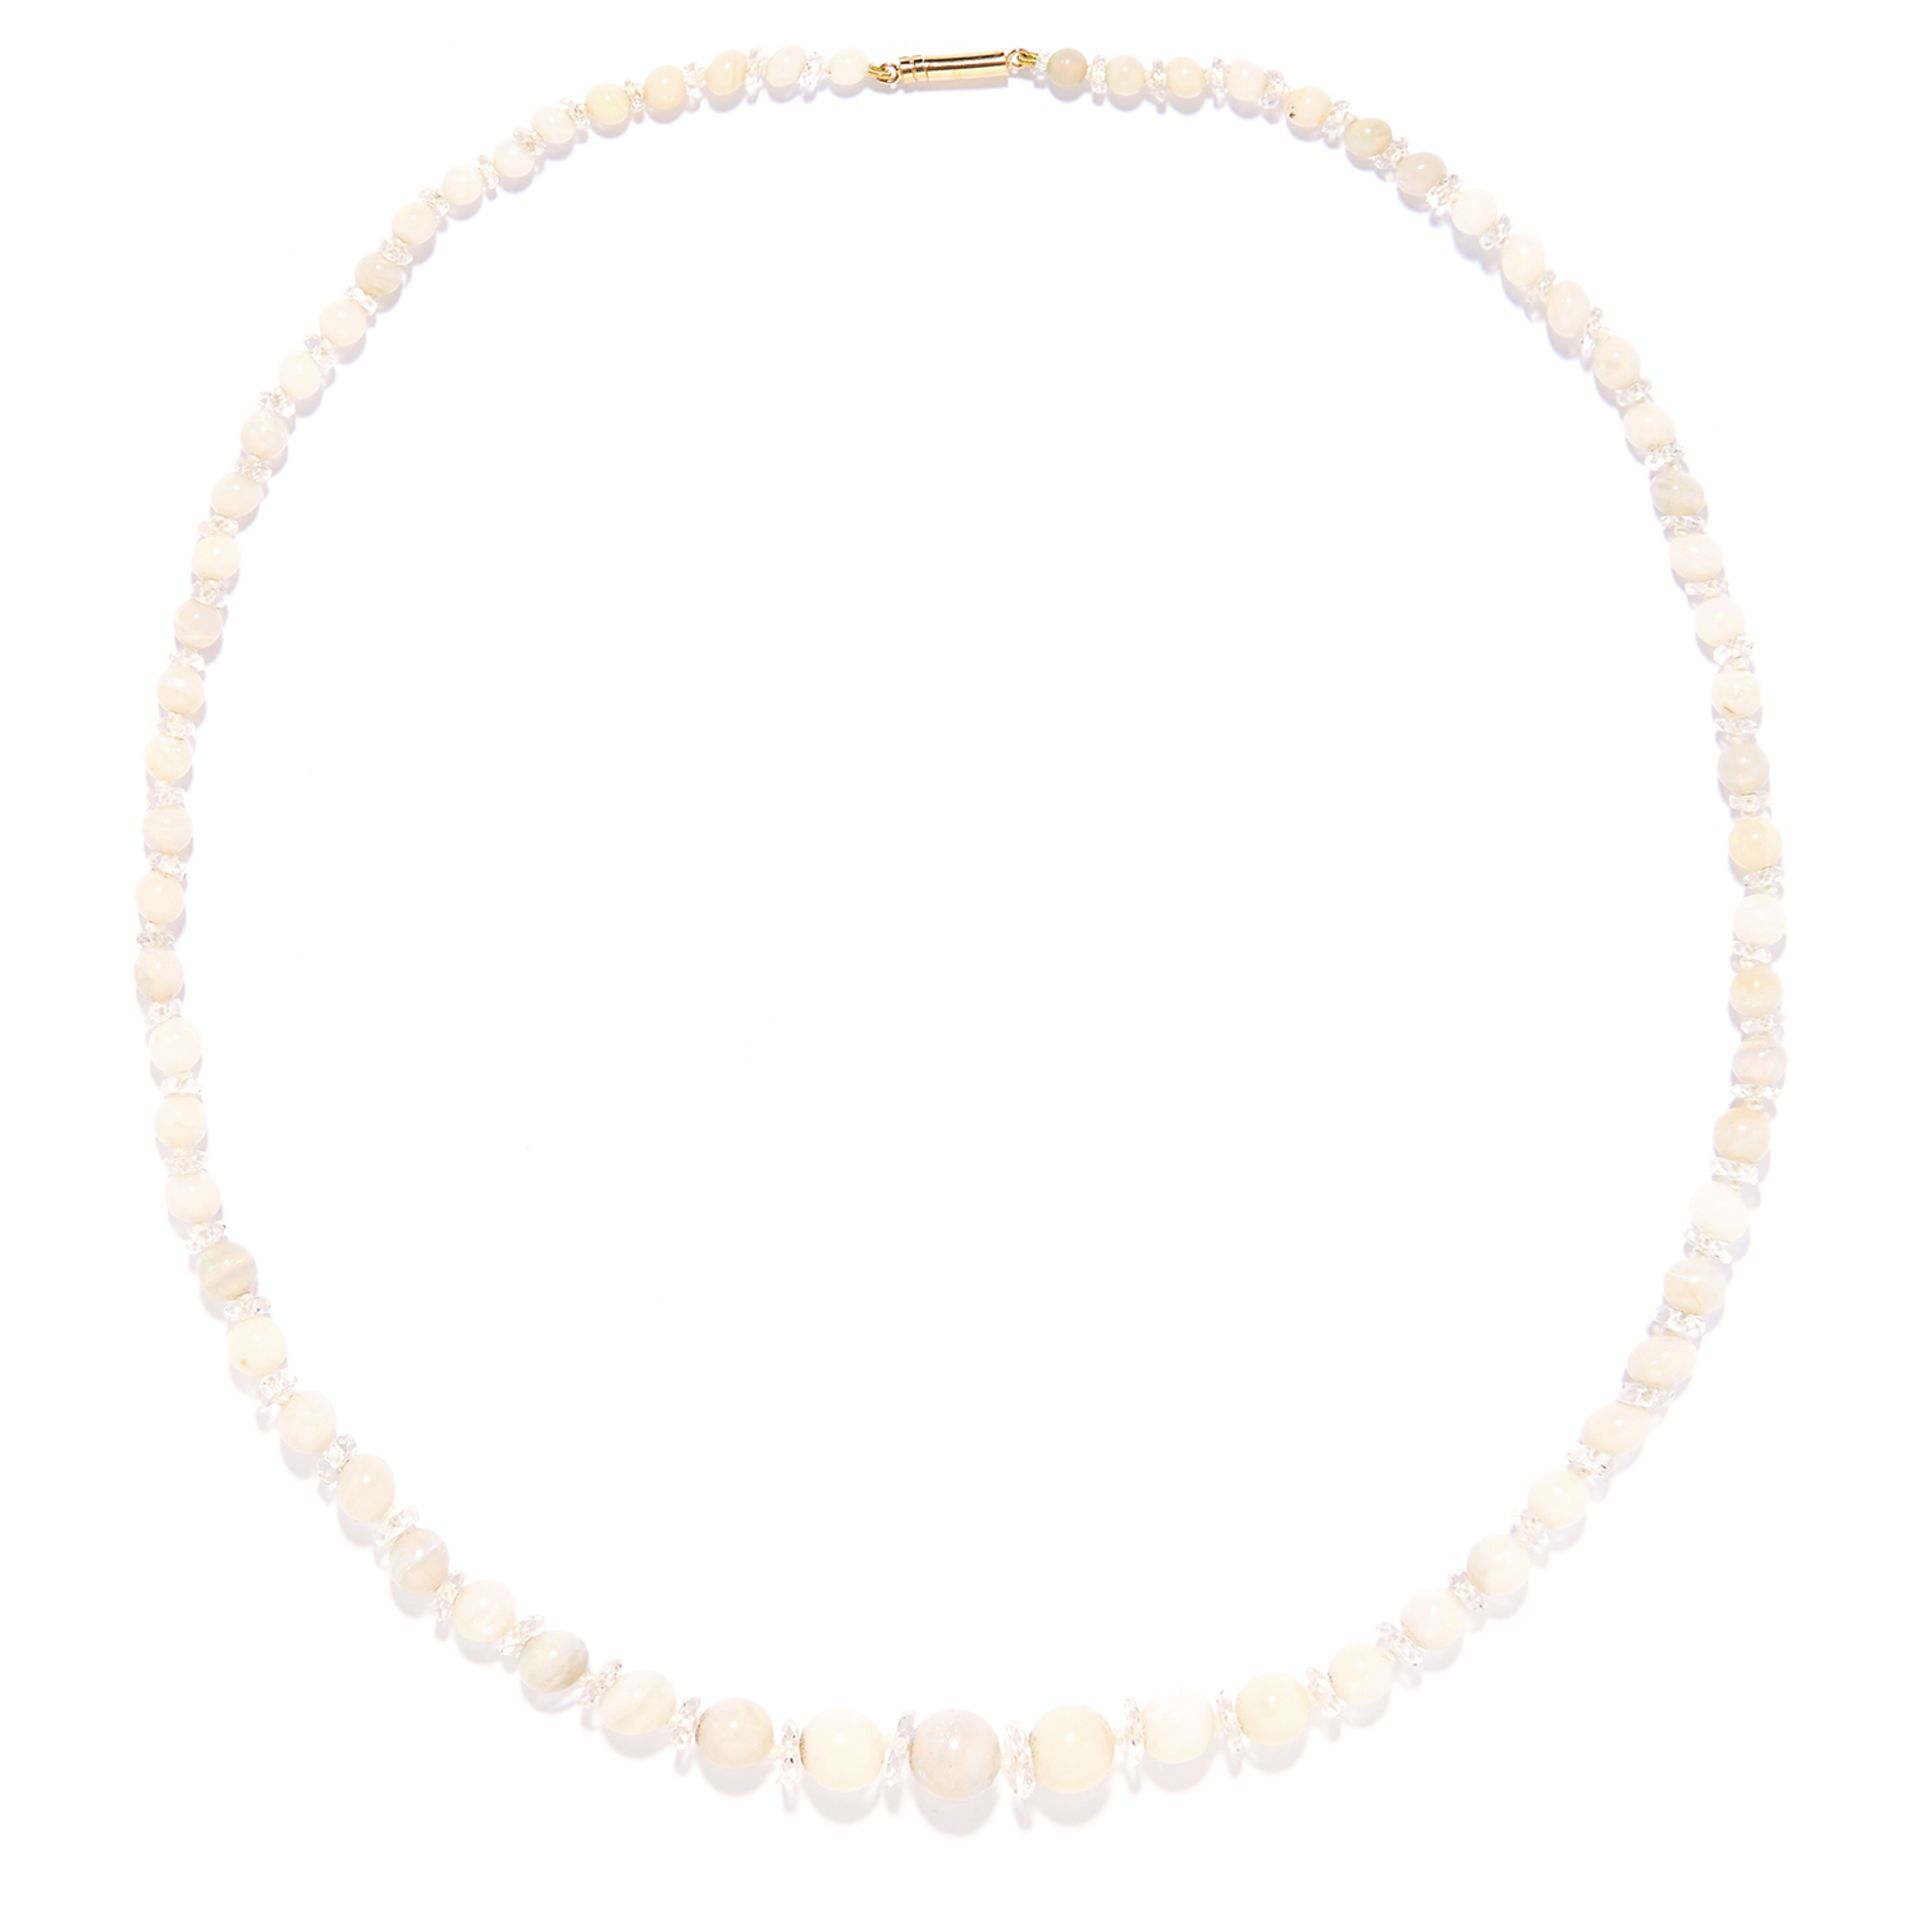 OPAL BEAD AND ROCK CRYSTAL NECKLACE comprising of a single row of opal beads and faceted rock